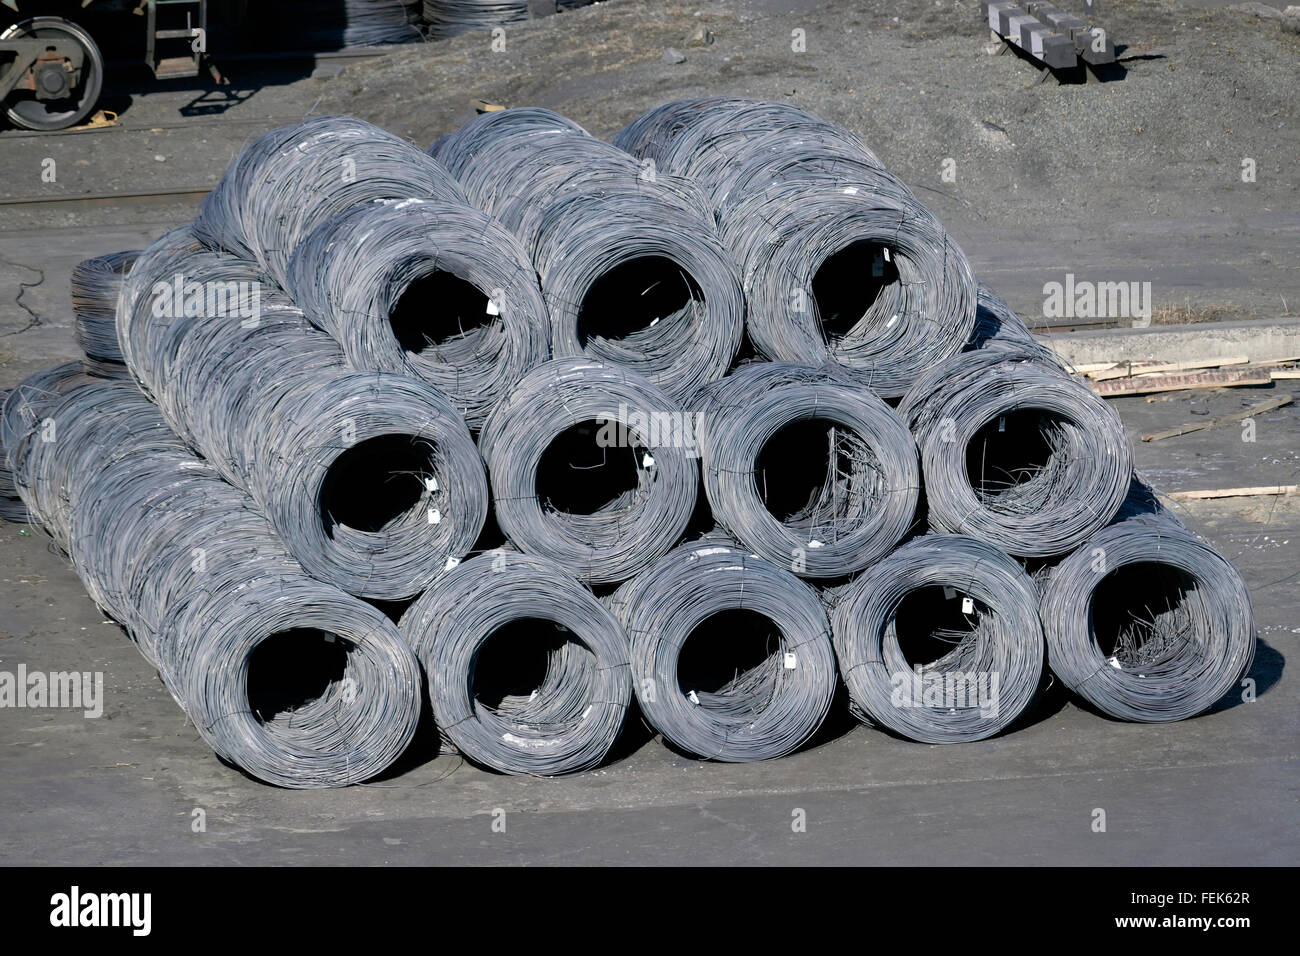 Group of steel coils prepared for shipping in dock area Stock Photo